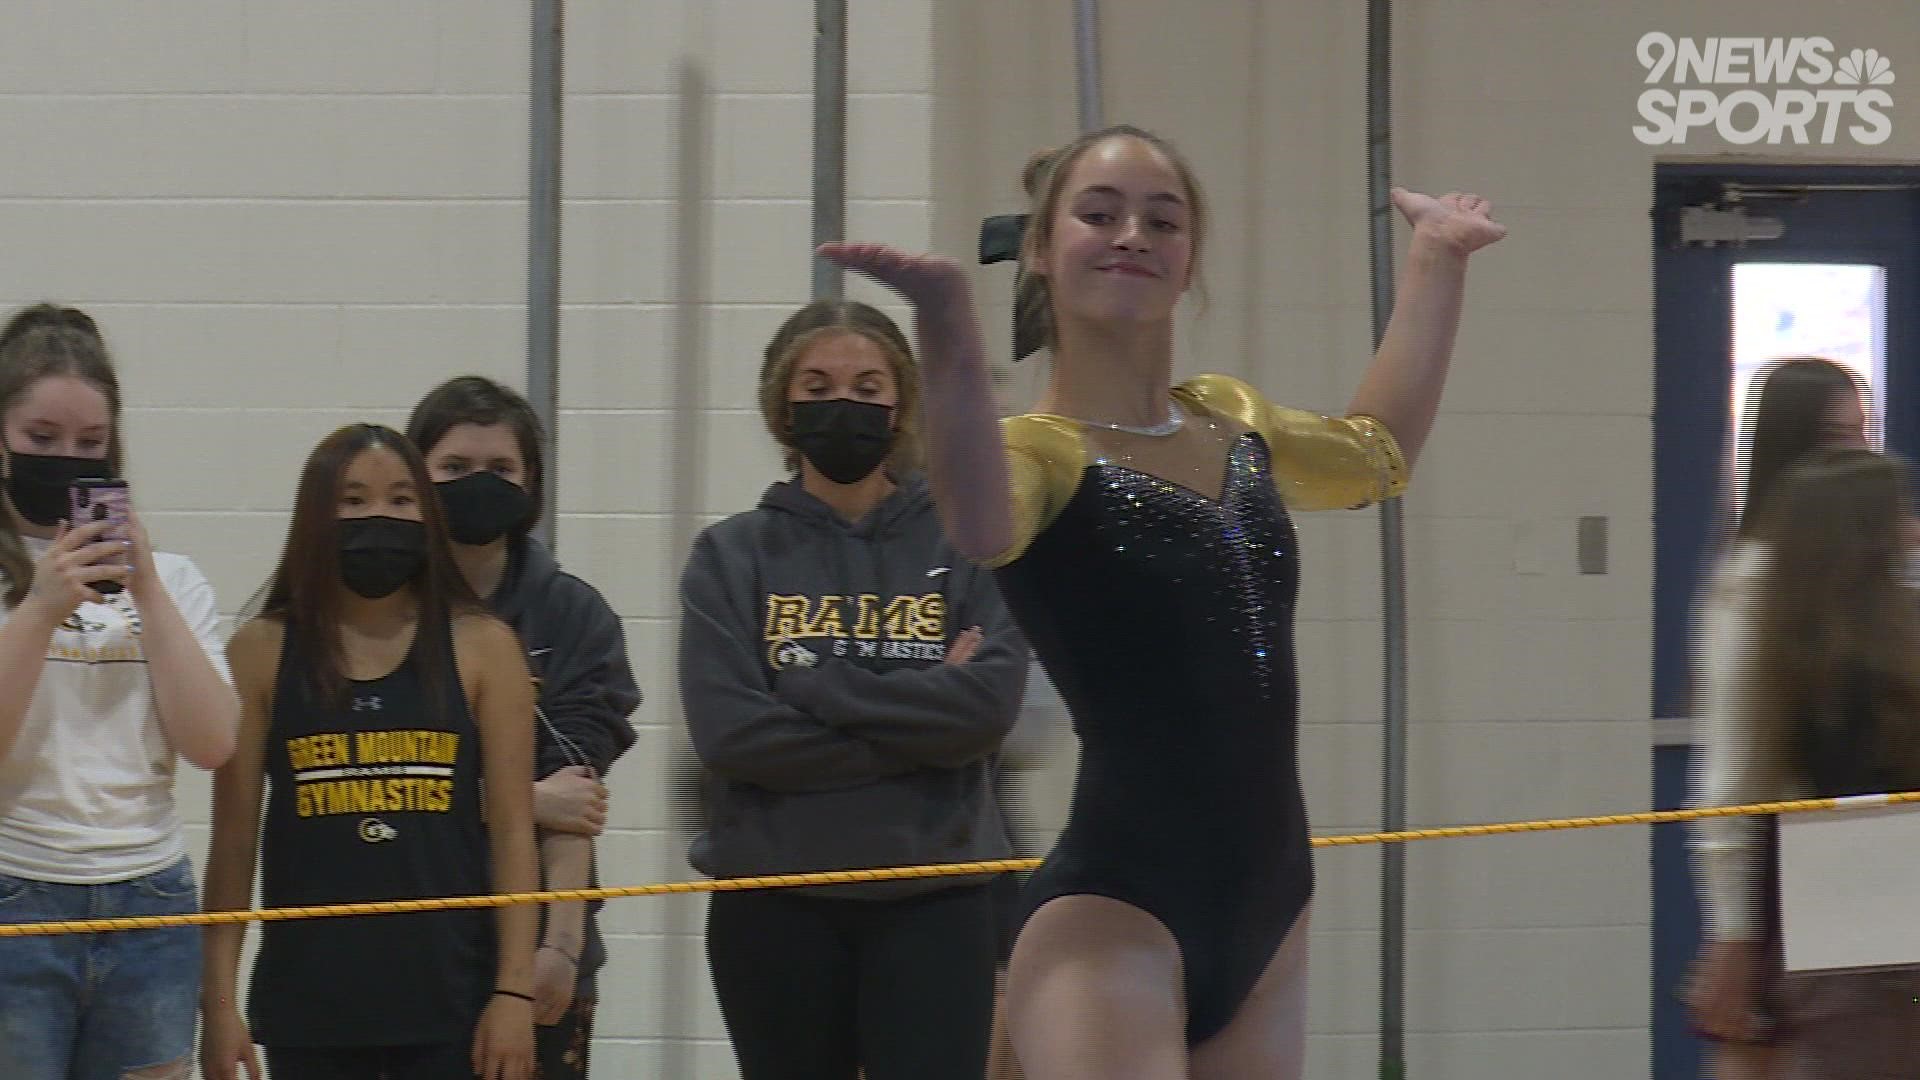 Martyna, a senior gymnast for the Rams, was crowned the 4A all-around gymnastics state champion.